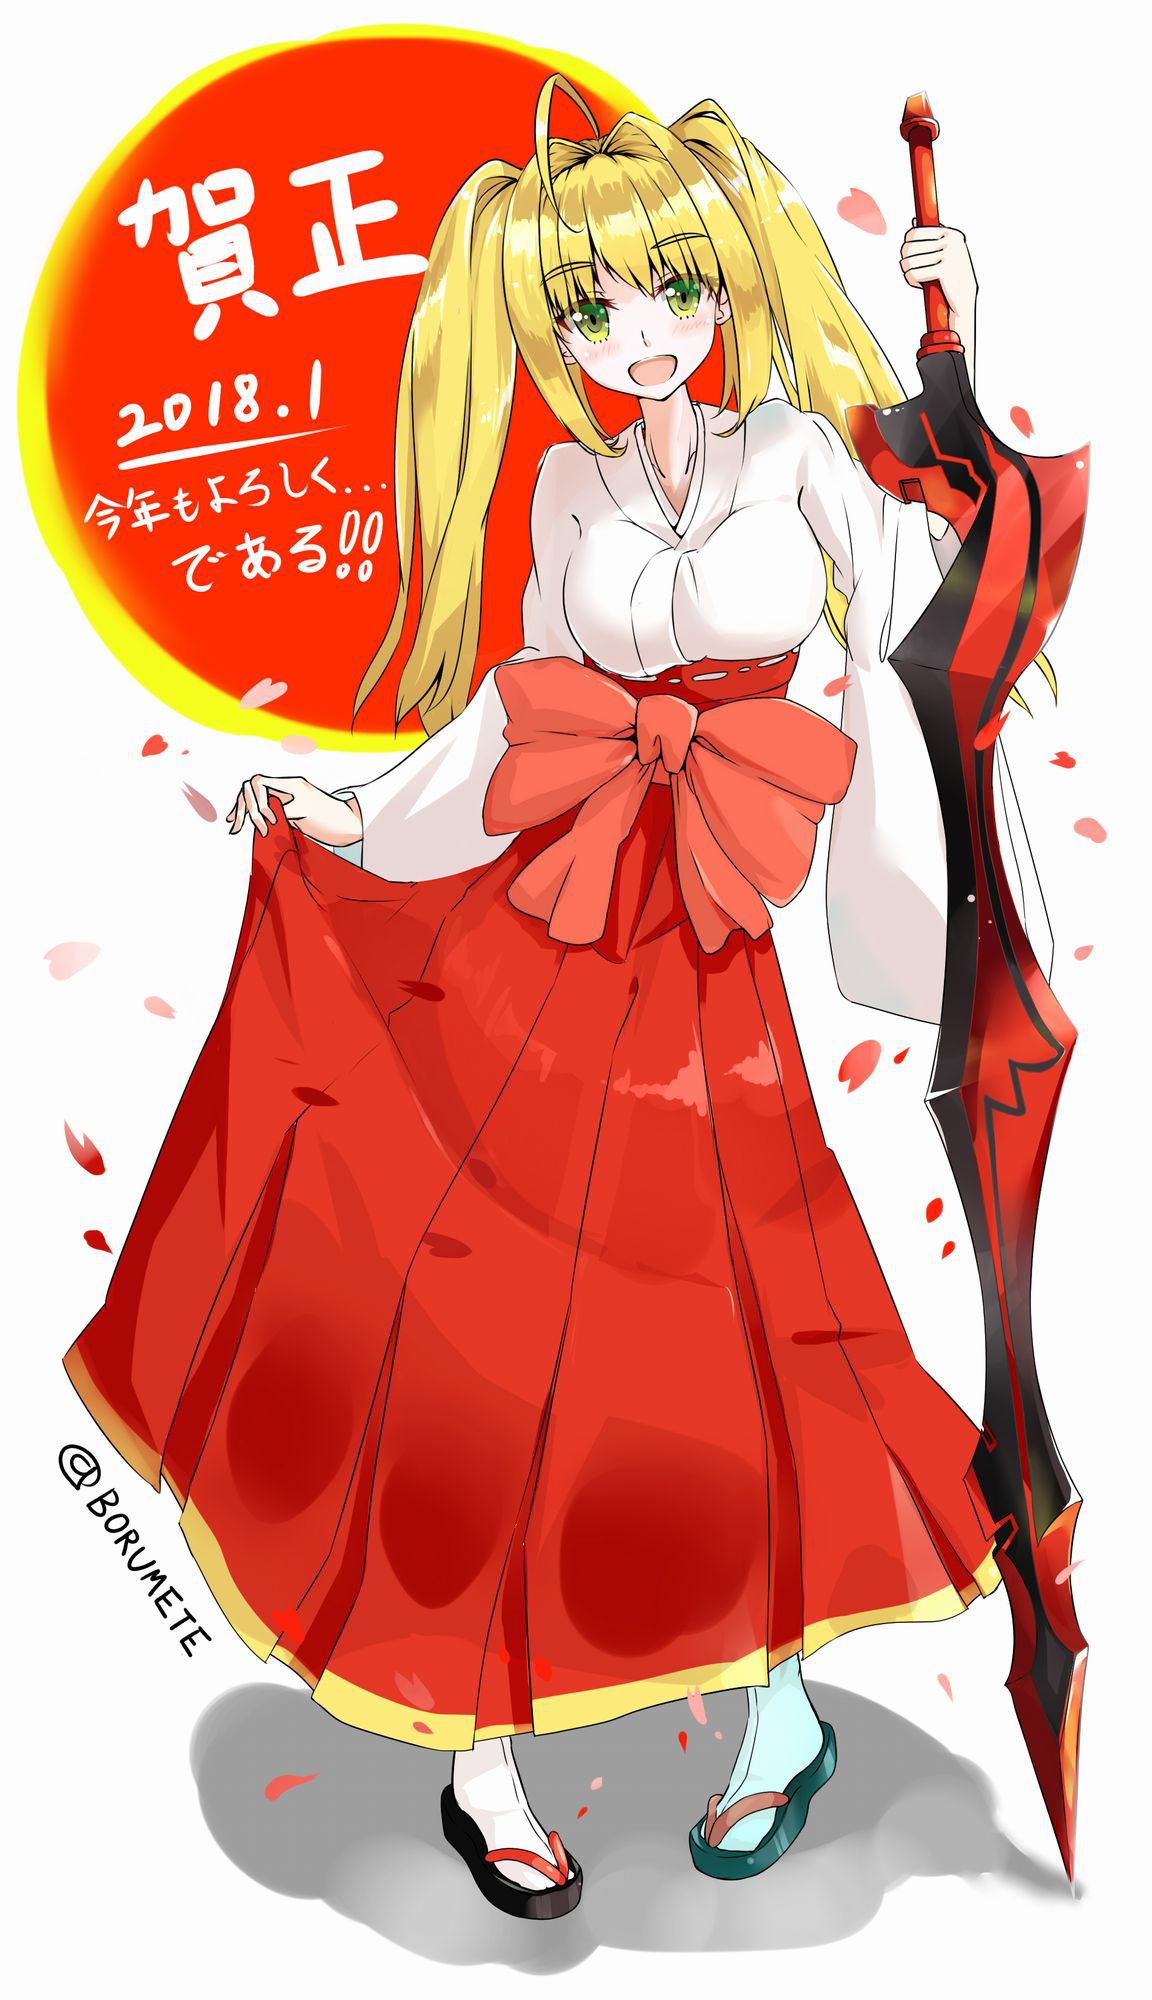 [Secondary ZIP] is about to start anime 100 pieces of cute image summary of Nero Claudius so soon 59